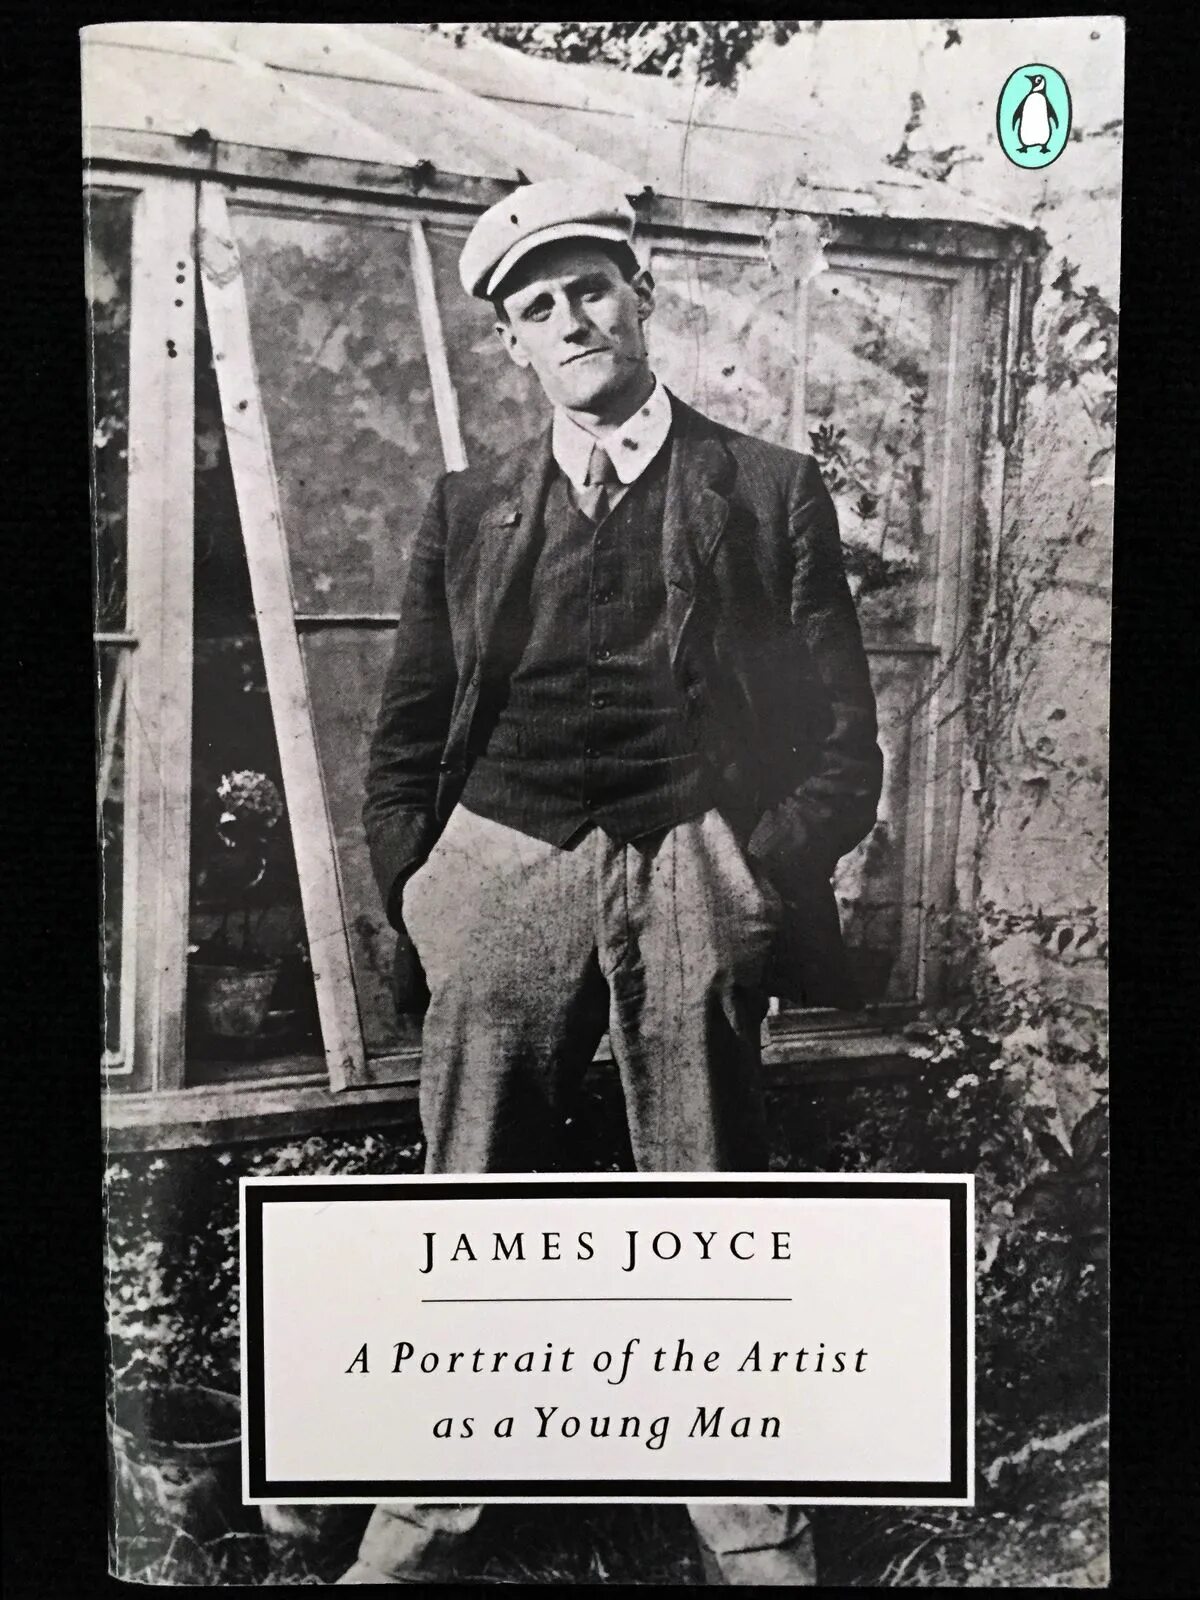 This man is young. James Joyce young. A portrait of the artist as a young man book. James Joyce a portrait of a young man. James Joyce a portrait of a young man old book.